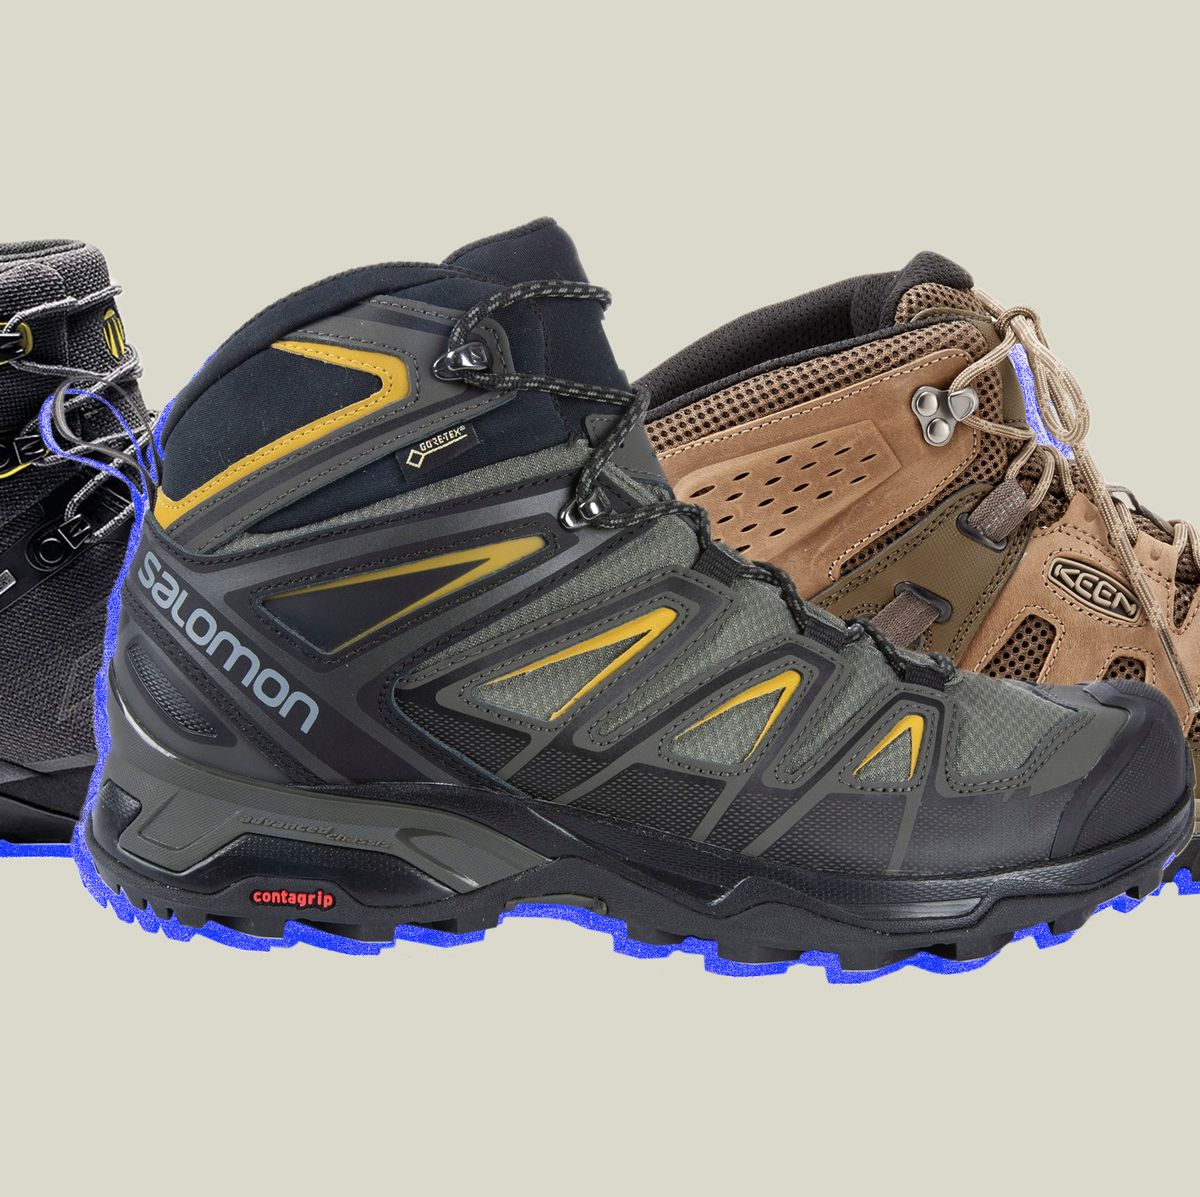 The 12 Hiking for Every Kind of Hiker